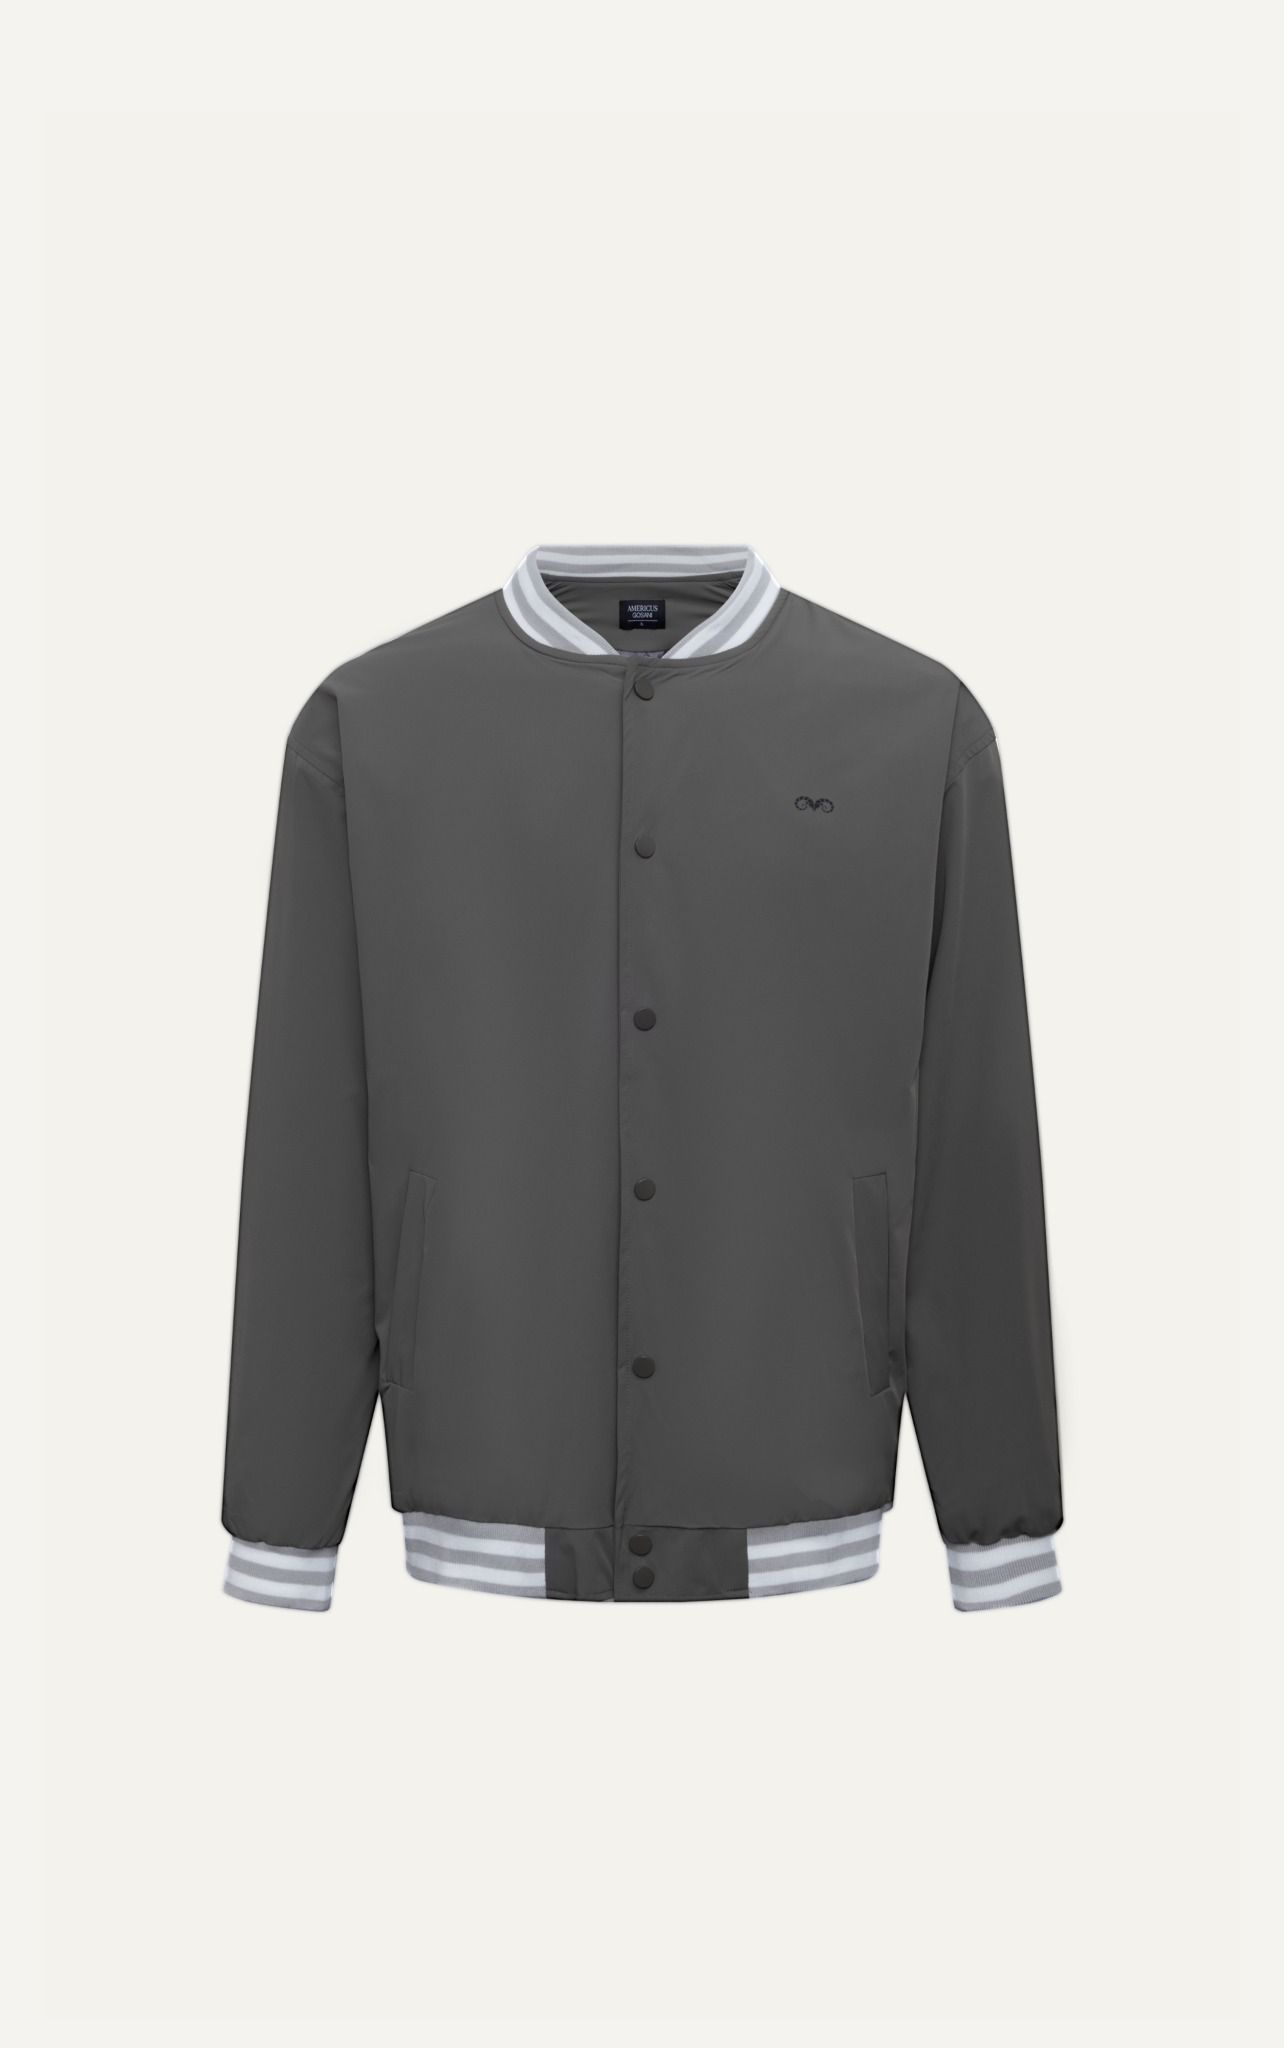  AG19 FACTORY LOOSE FIT BASIC BOMBER - GREY 